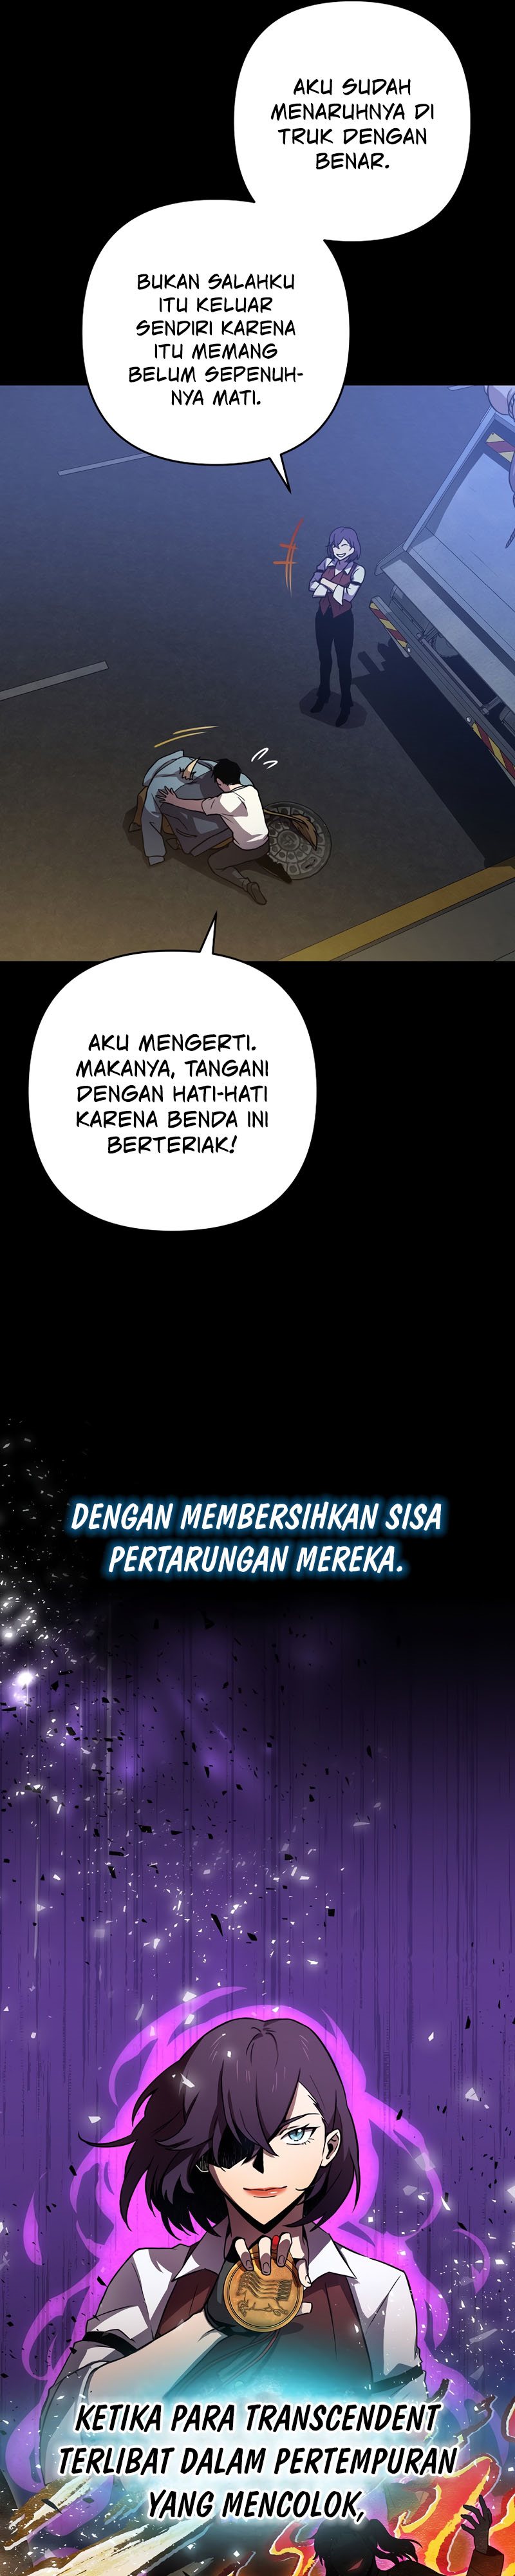 Cursed Manager’s Regression Chapter 01 11